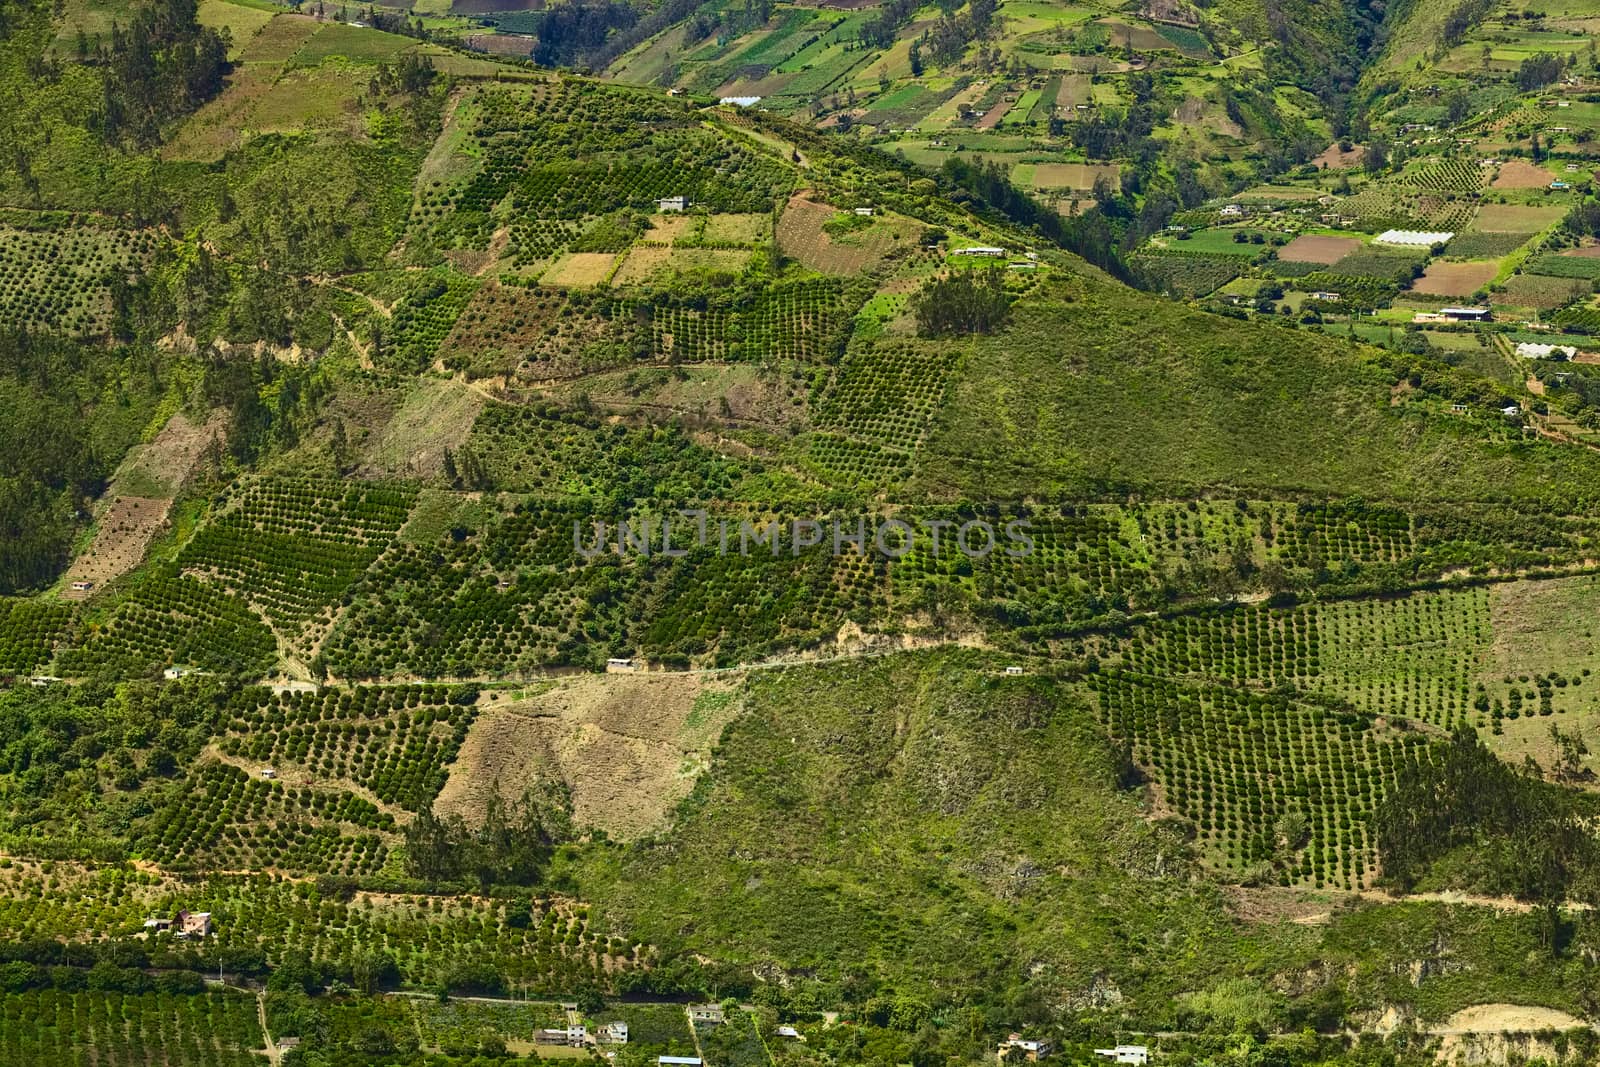 Rural hillside landscape with small farms and orchards along the road between Ambato and Banos in Tungurahua Province in Central Ecuador. Even though the area lies relatively high (around 1800-2000 meters), many fruits and vegetables are being grown here.